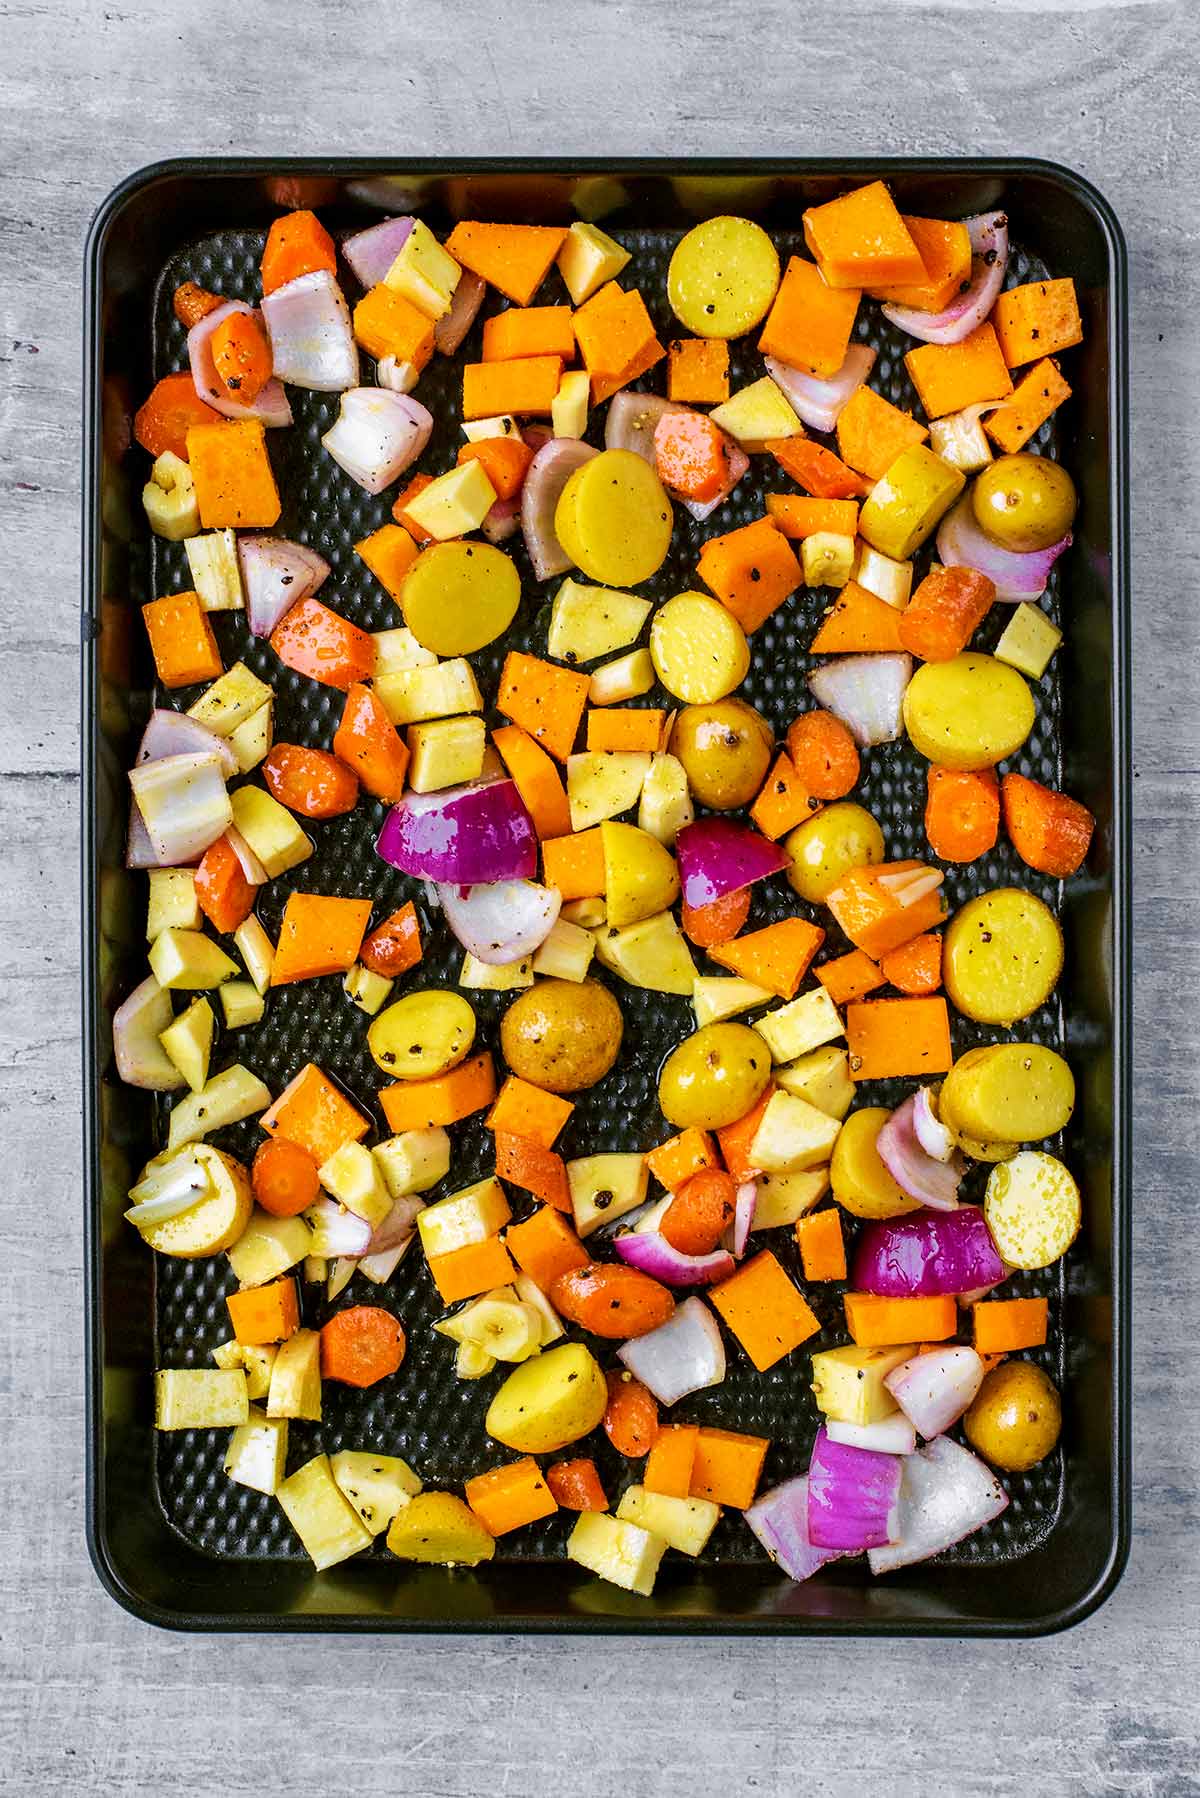 A baking tray with chopped vegetables covering it.